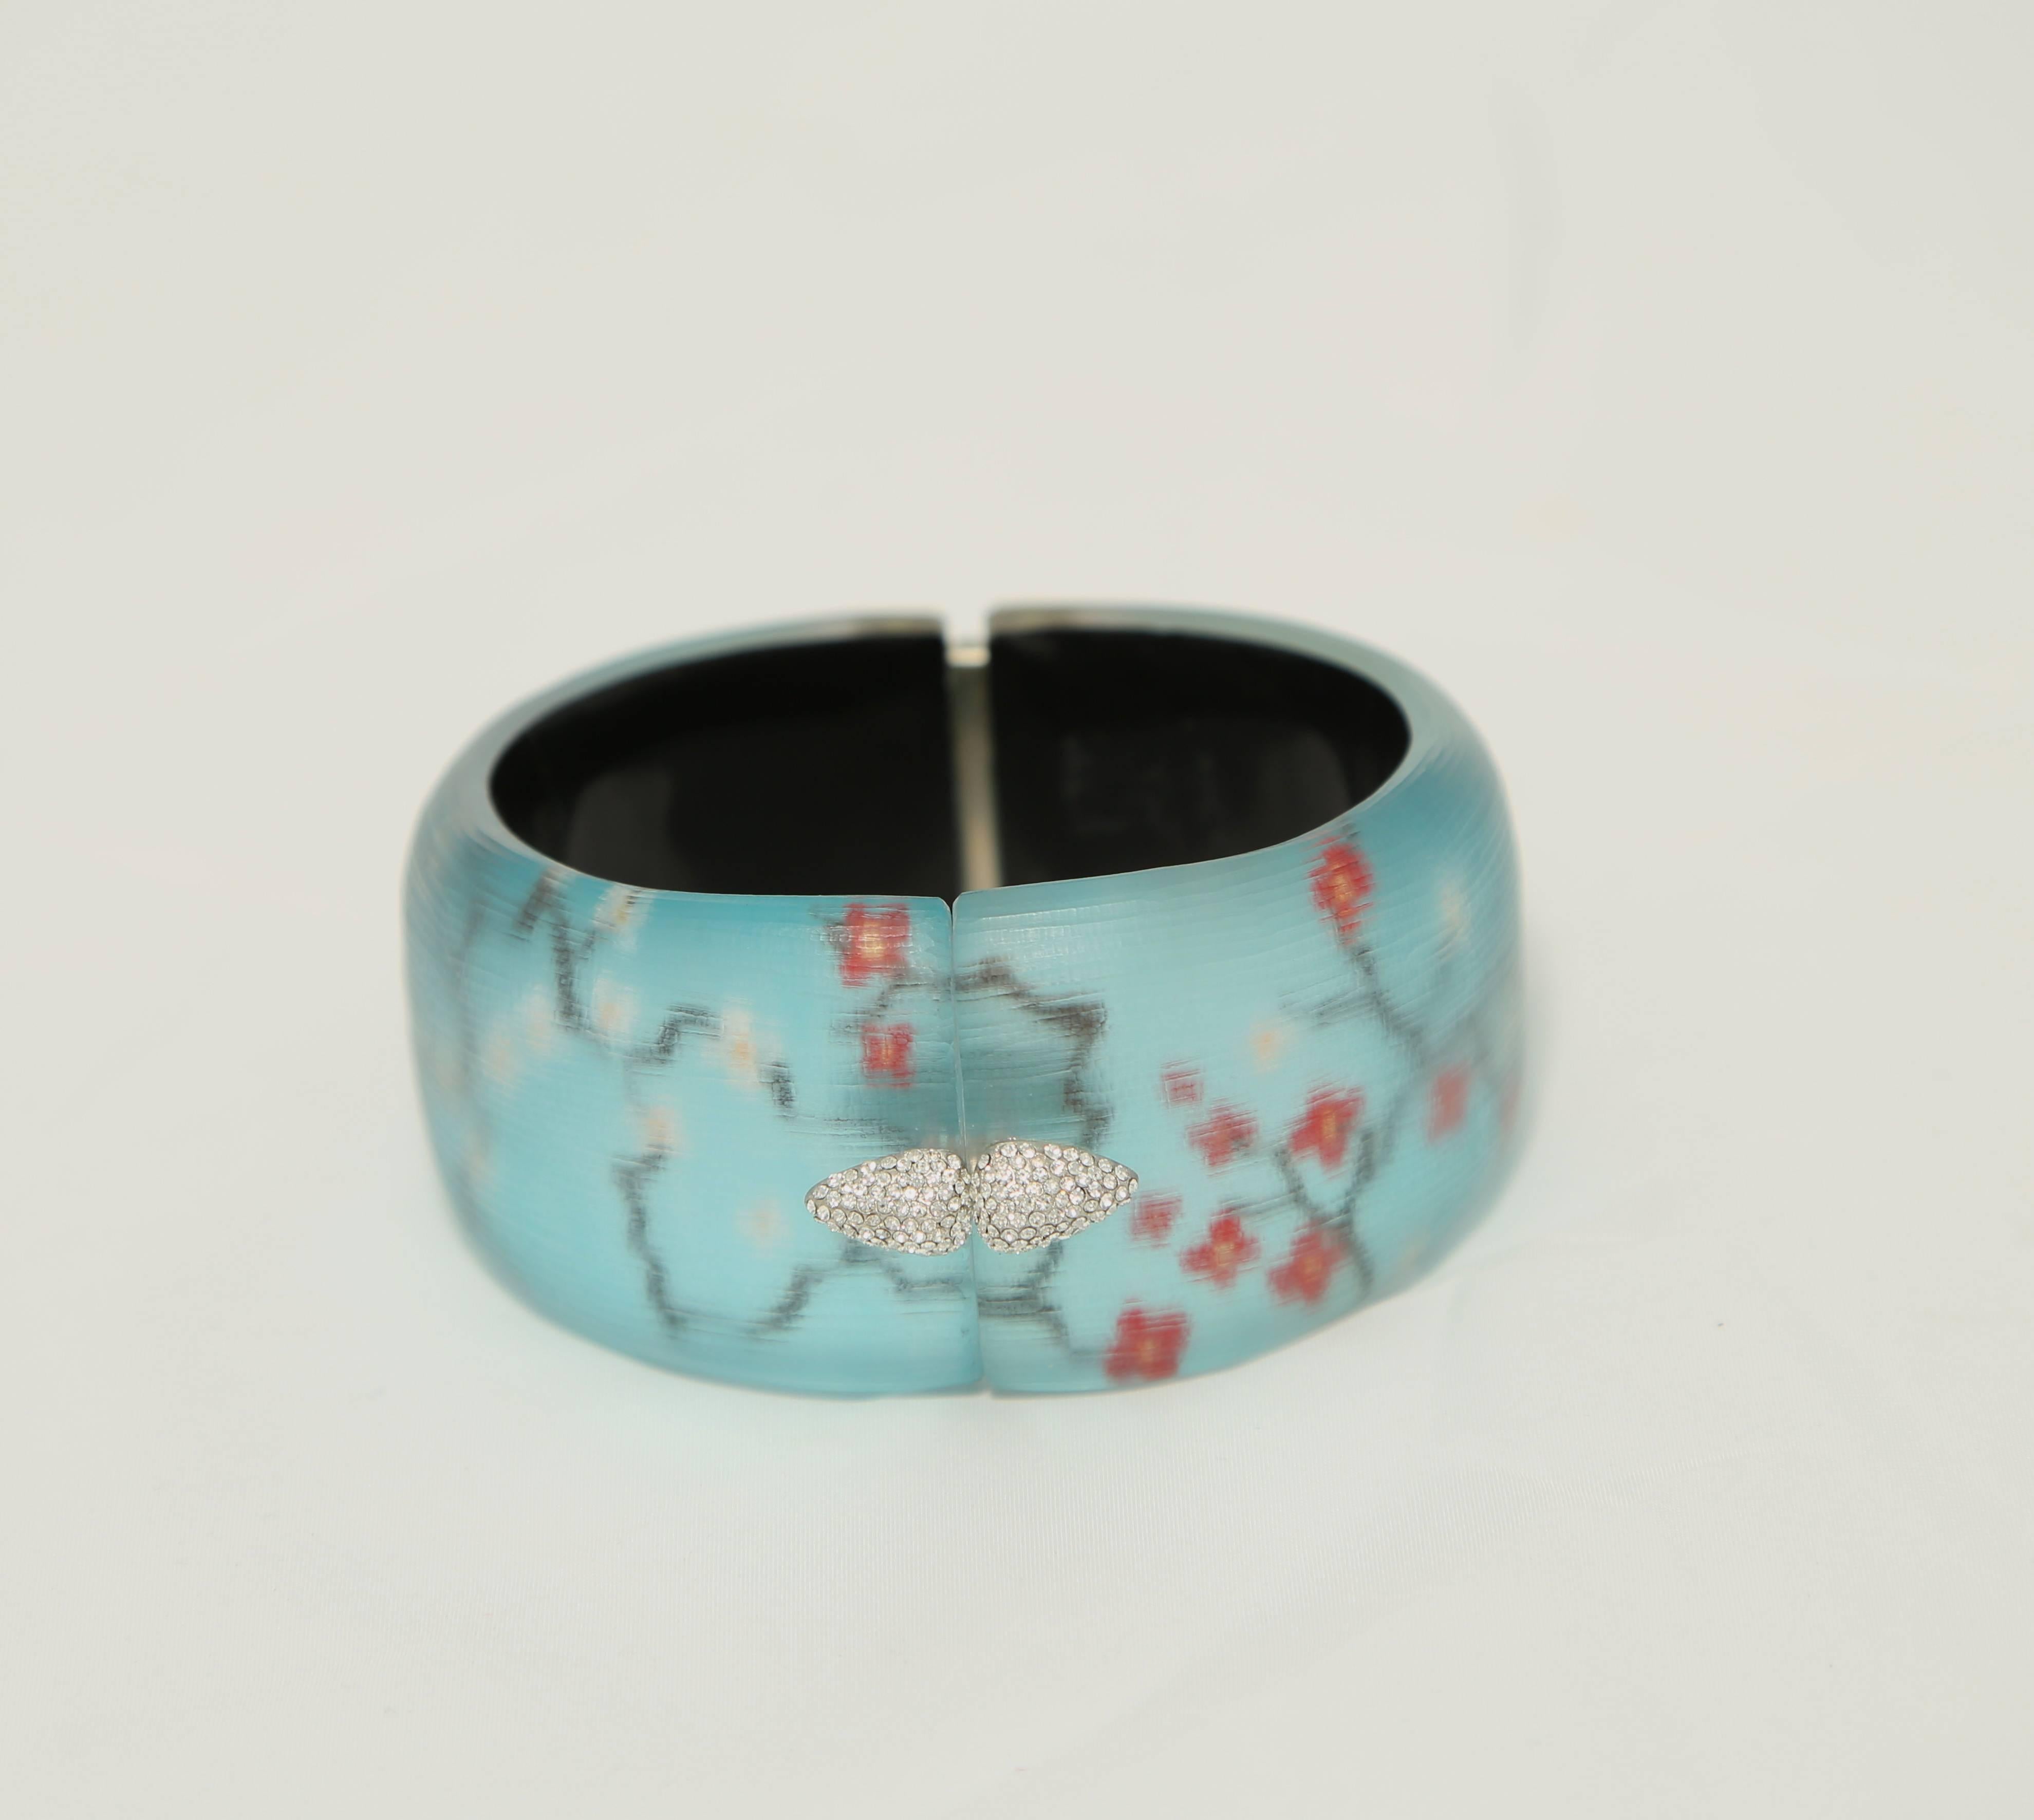 Alexis Bittar floral Lucite cuff with magnetic hinge catch 

Width 1.5
Circumference - 6
